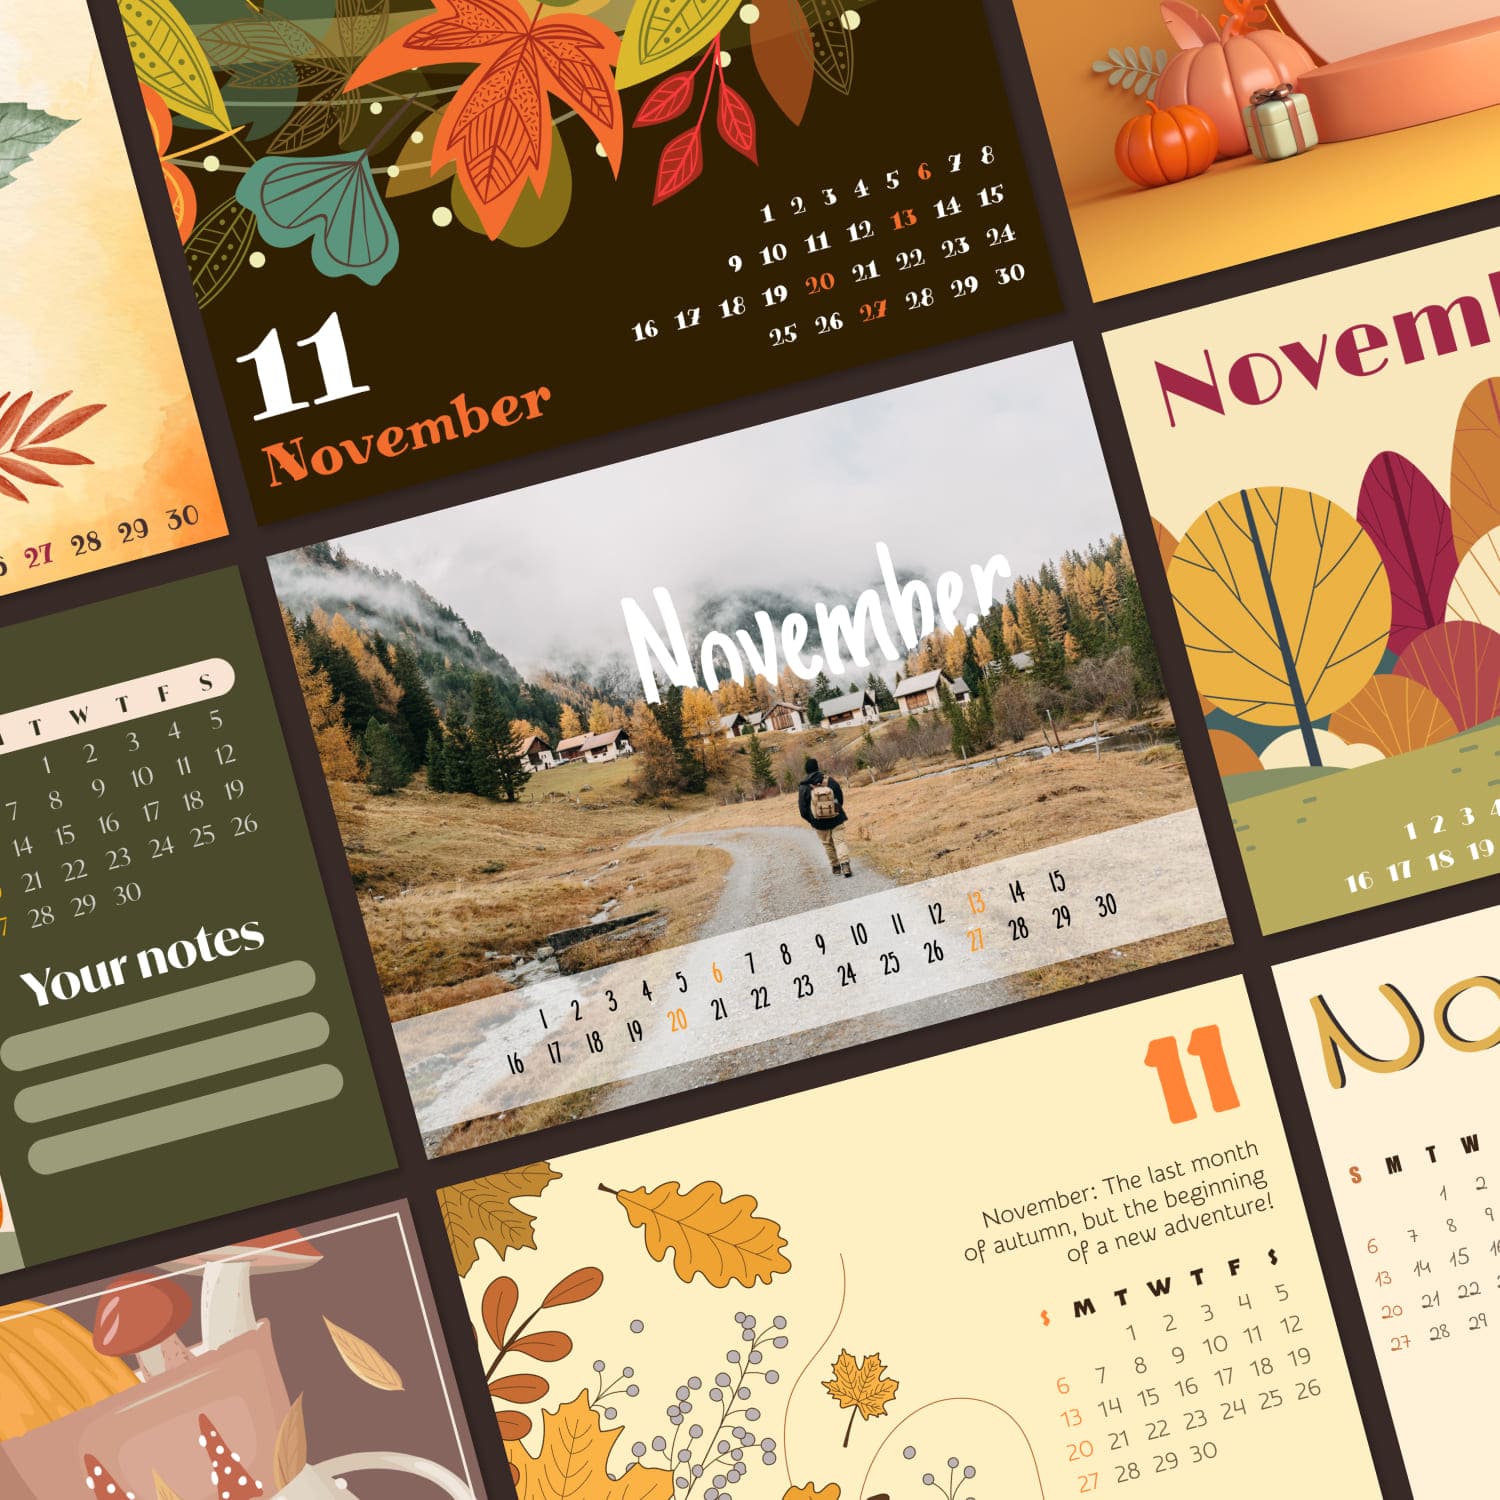 10 Free Editable November Calendars 1500x1500, Second Picture.